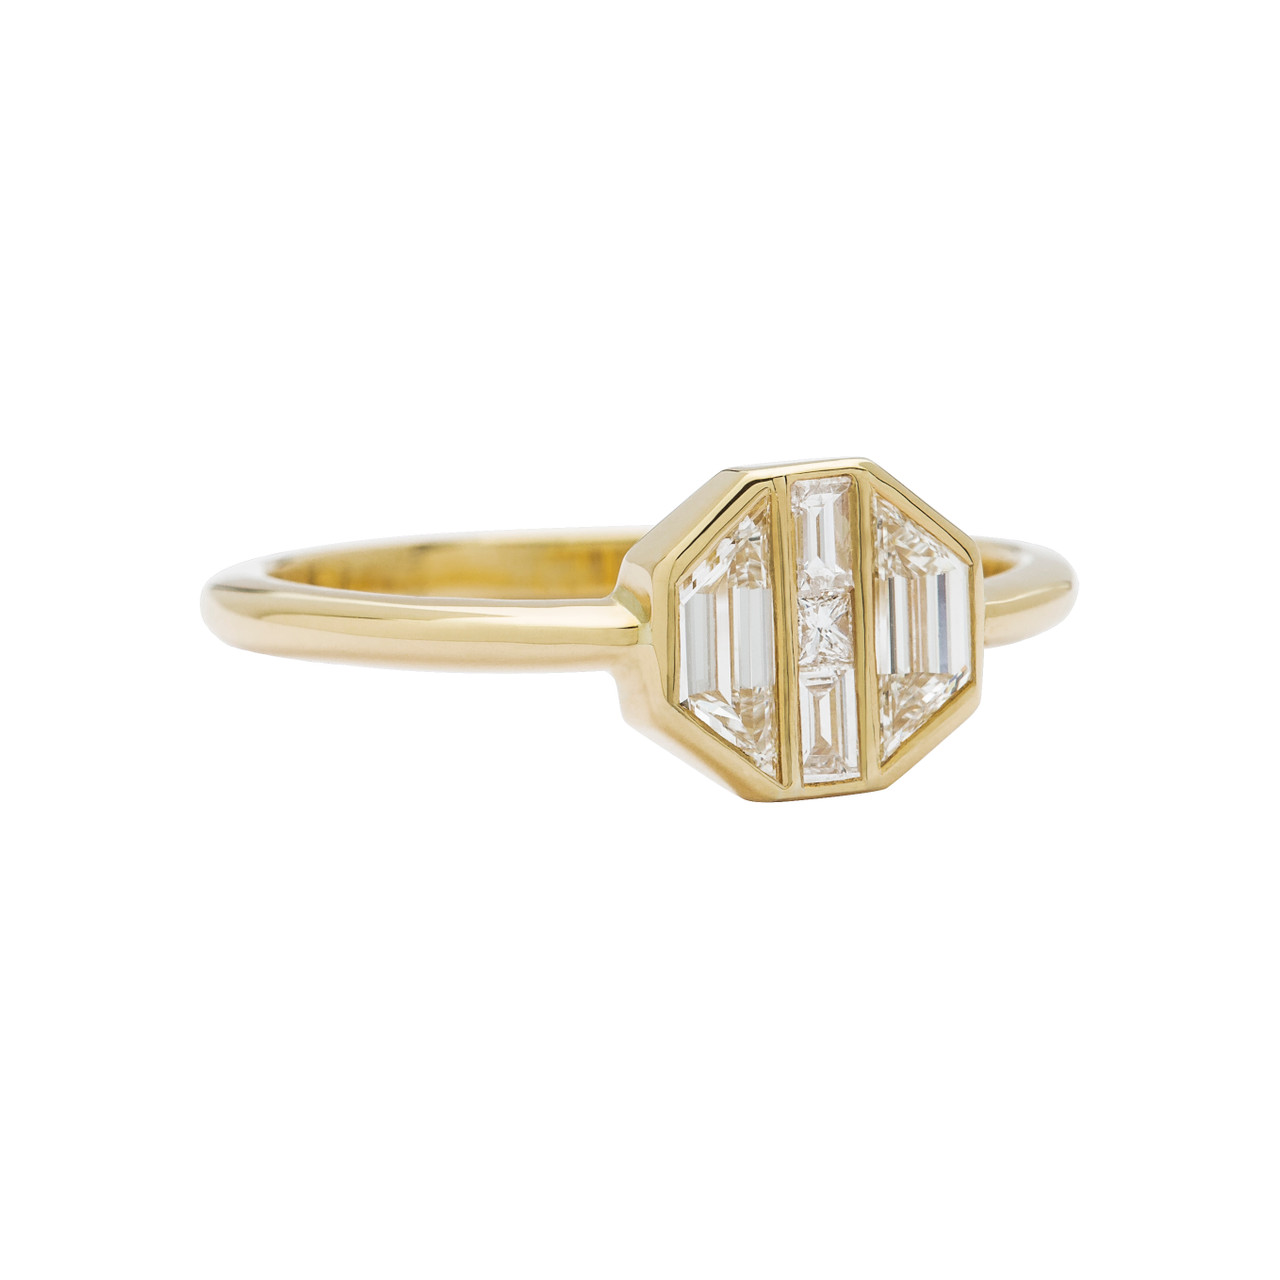 Muse by tomfoolery, 18ct Yellow Gold Diamond Hexagon Maze Ring, tomfoolery